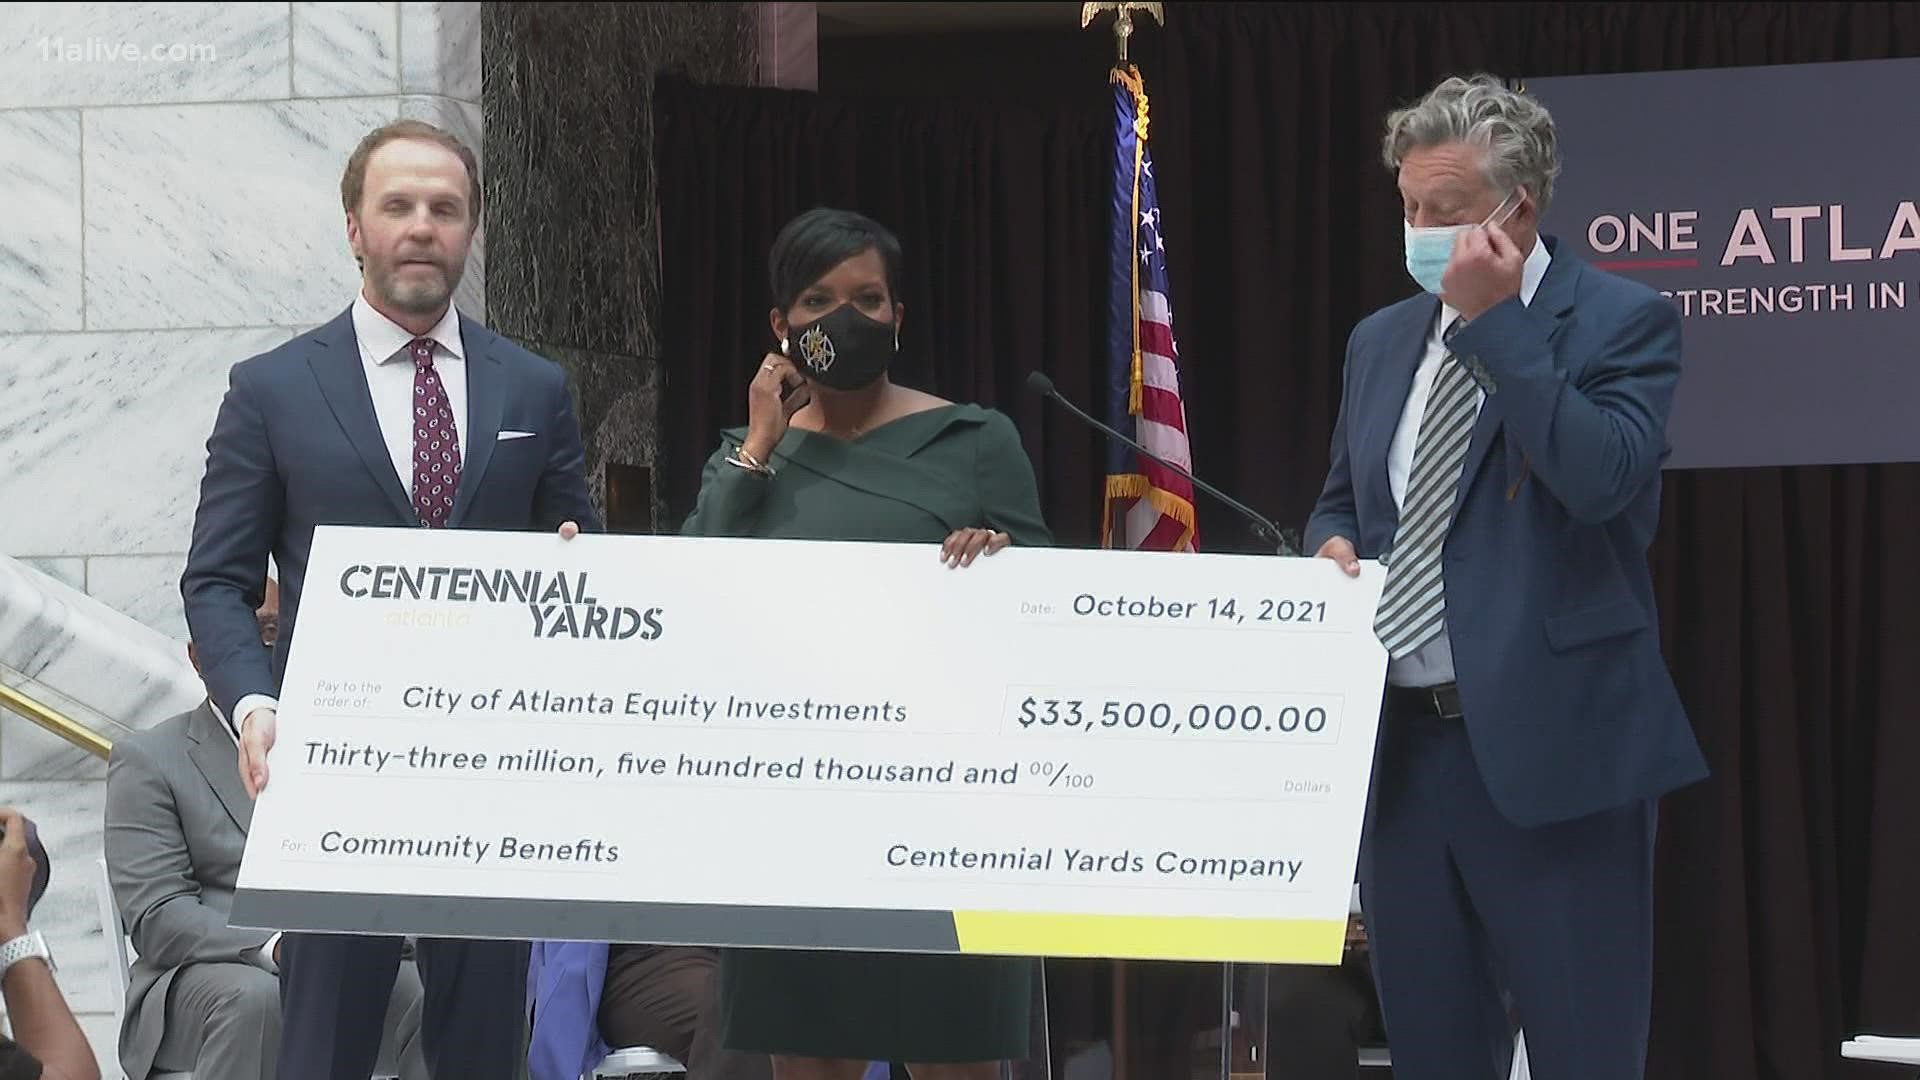 Atlanta Mayor Keisha Lance Bottoms is touting $42 million in community investments from one of the most anticipated projects in the city.